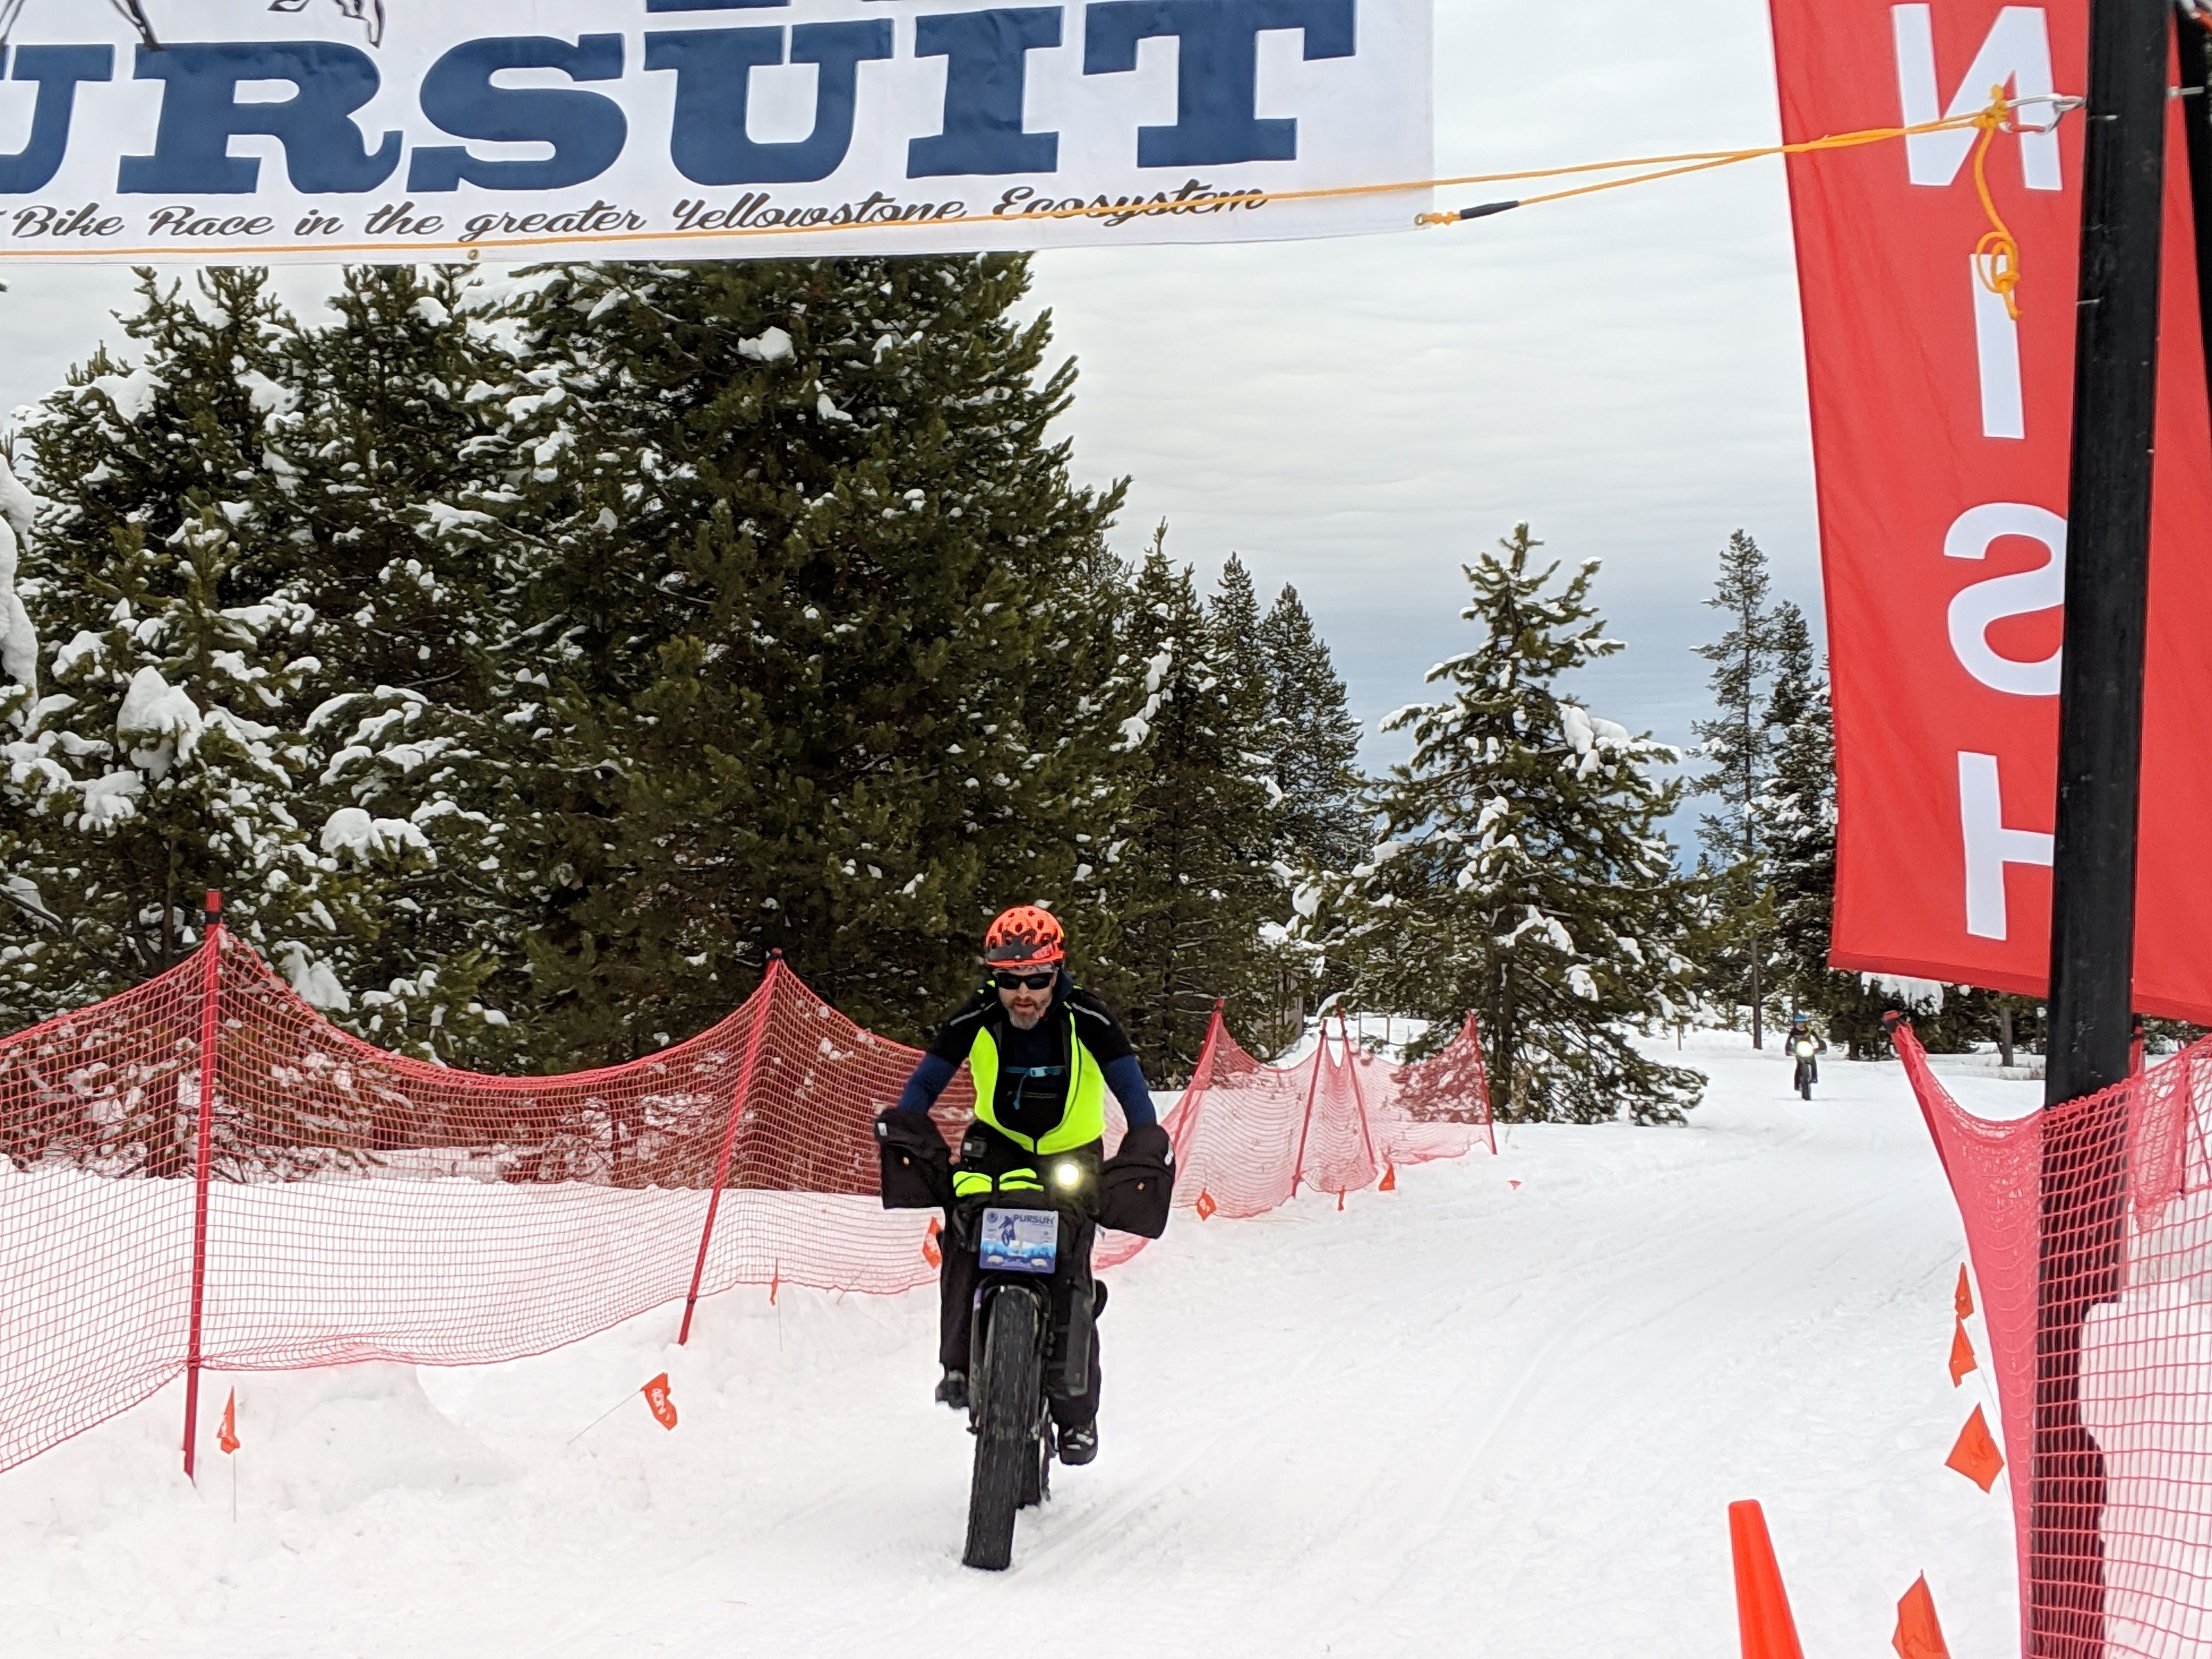 Mountain bike racer crossing the finish line on a fat bike in the snow